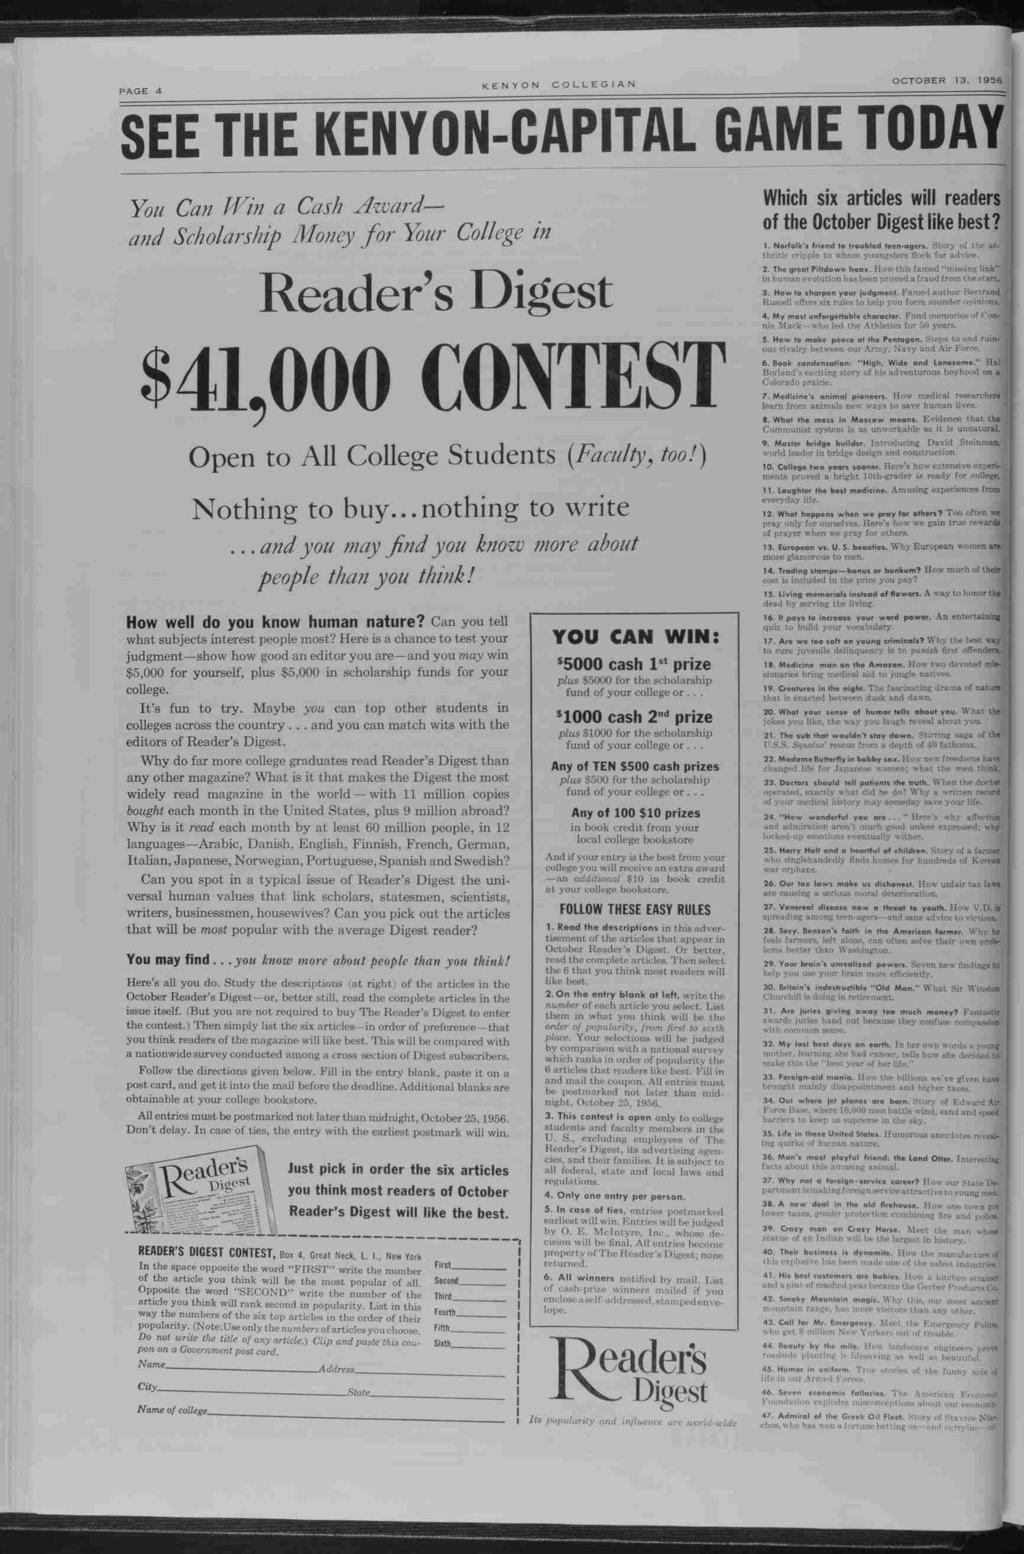 PAGE 4 KENYON OCTOBER 3, COLLEGAN 956 ETH KENYON-CAPT- A! TOBAY You Can Wn a Cash Award and Scholarshp Money for Your College n Readers Dgest Open to All College Students (Faculty, too!